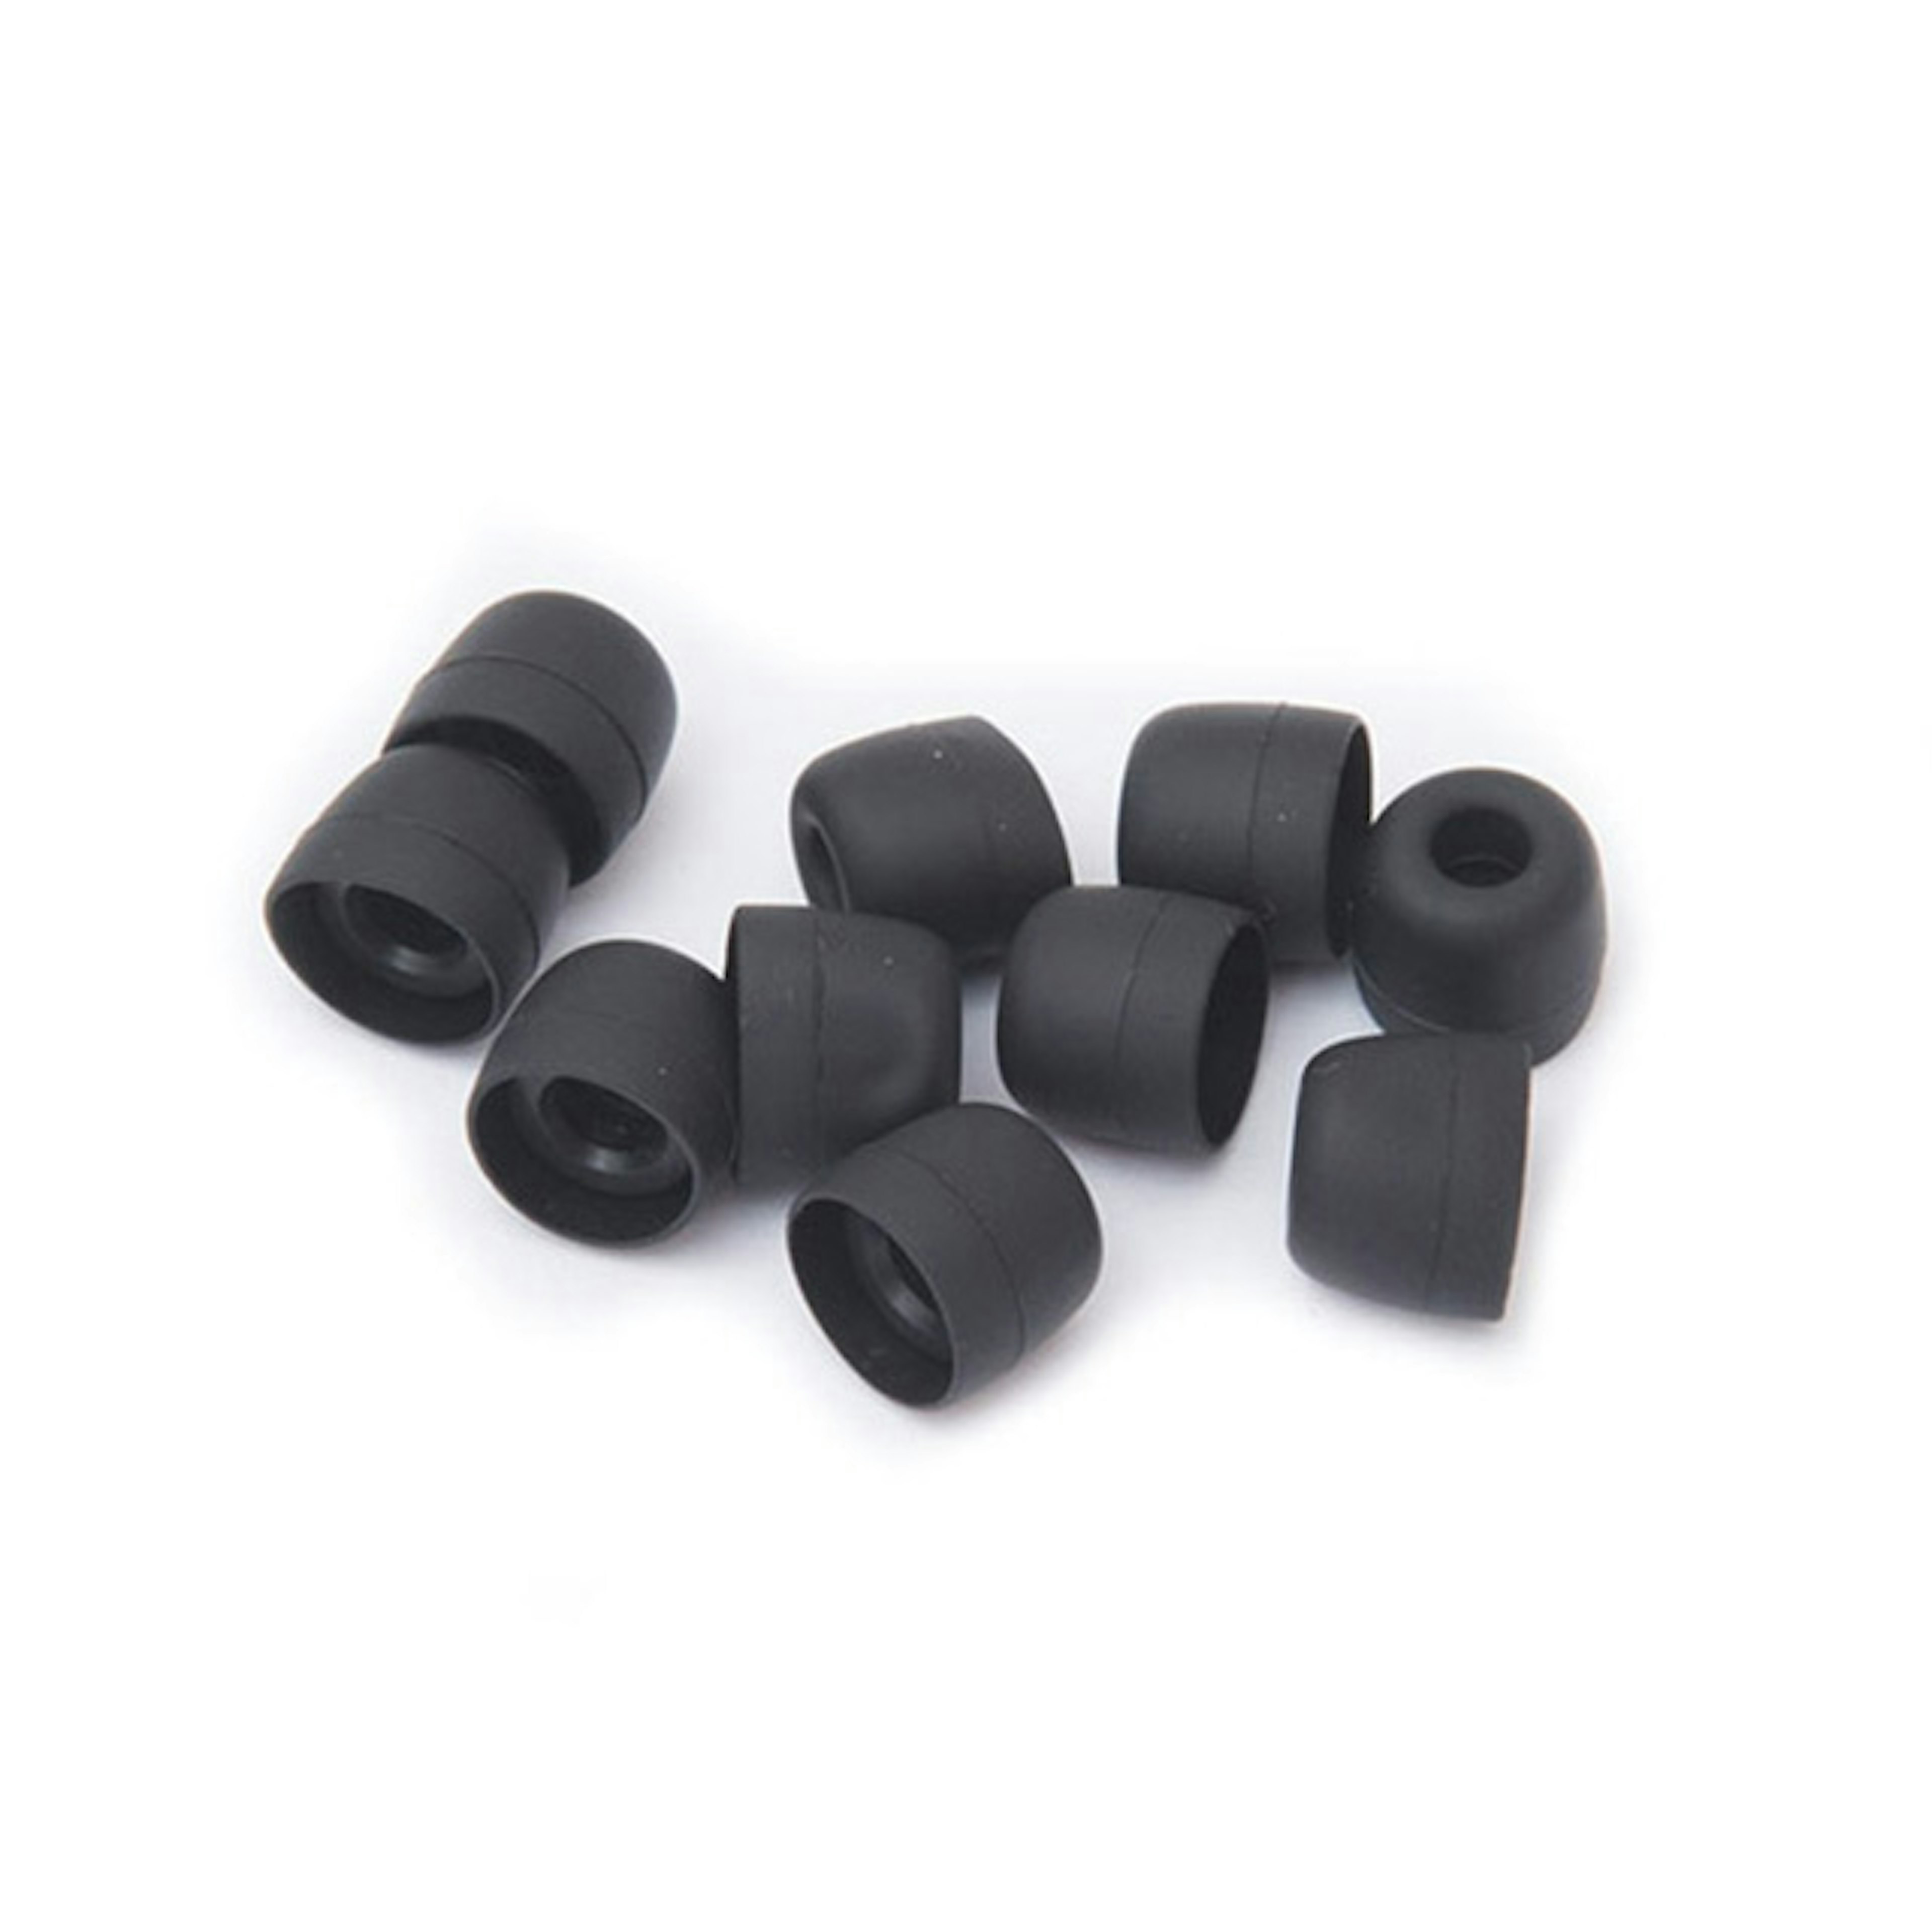 Ear adapter, black, 10 pieces (S)